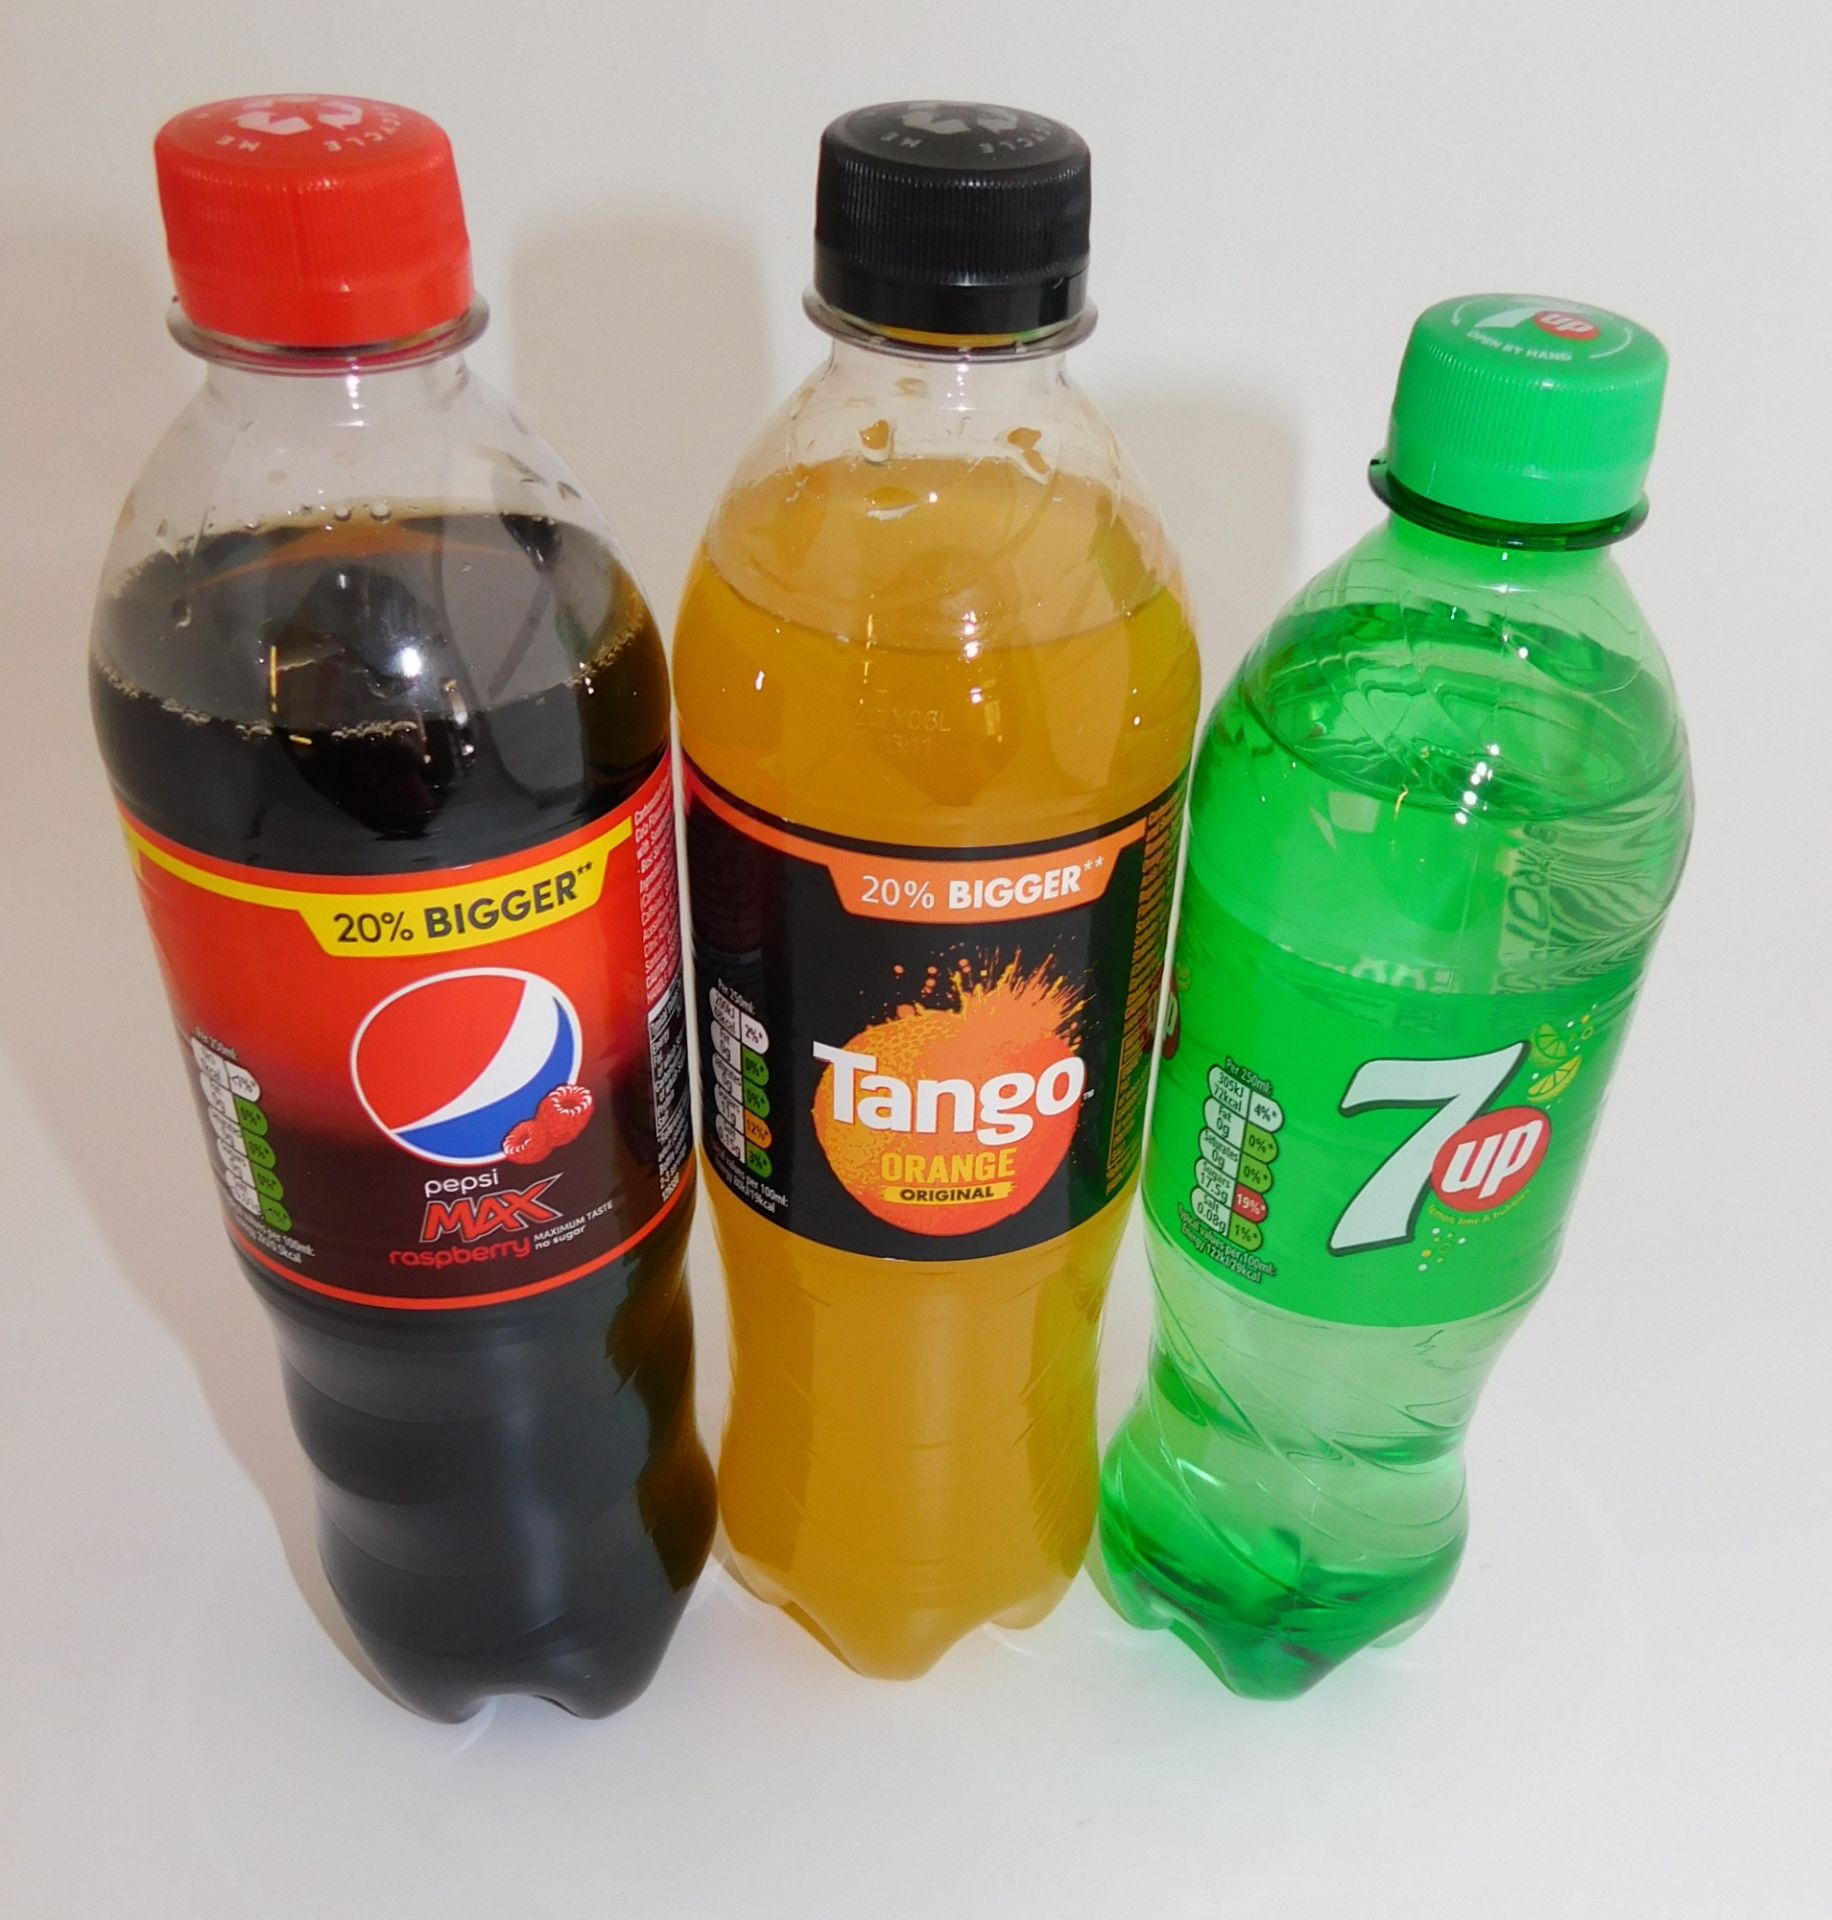 Contents of Pallet to Include; 75 Bottles of Pepsi Max Raspberry, 600ml, 200 Bottles of Tango